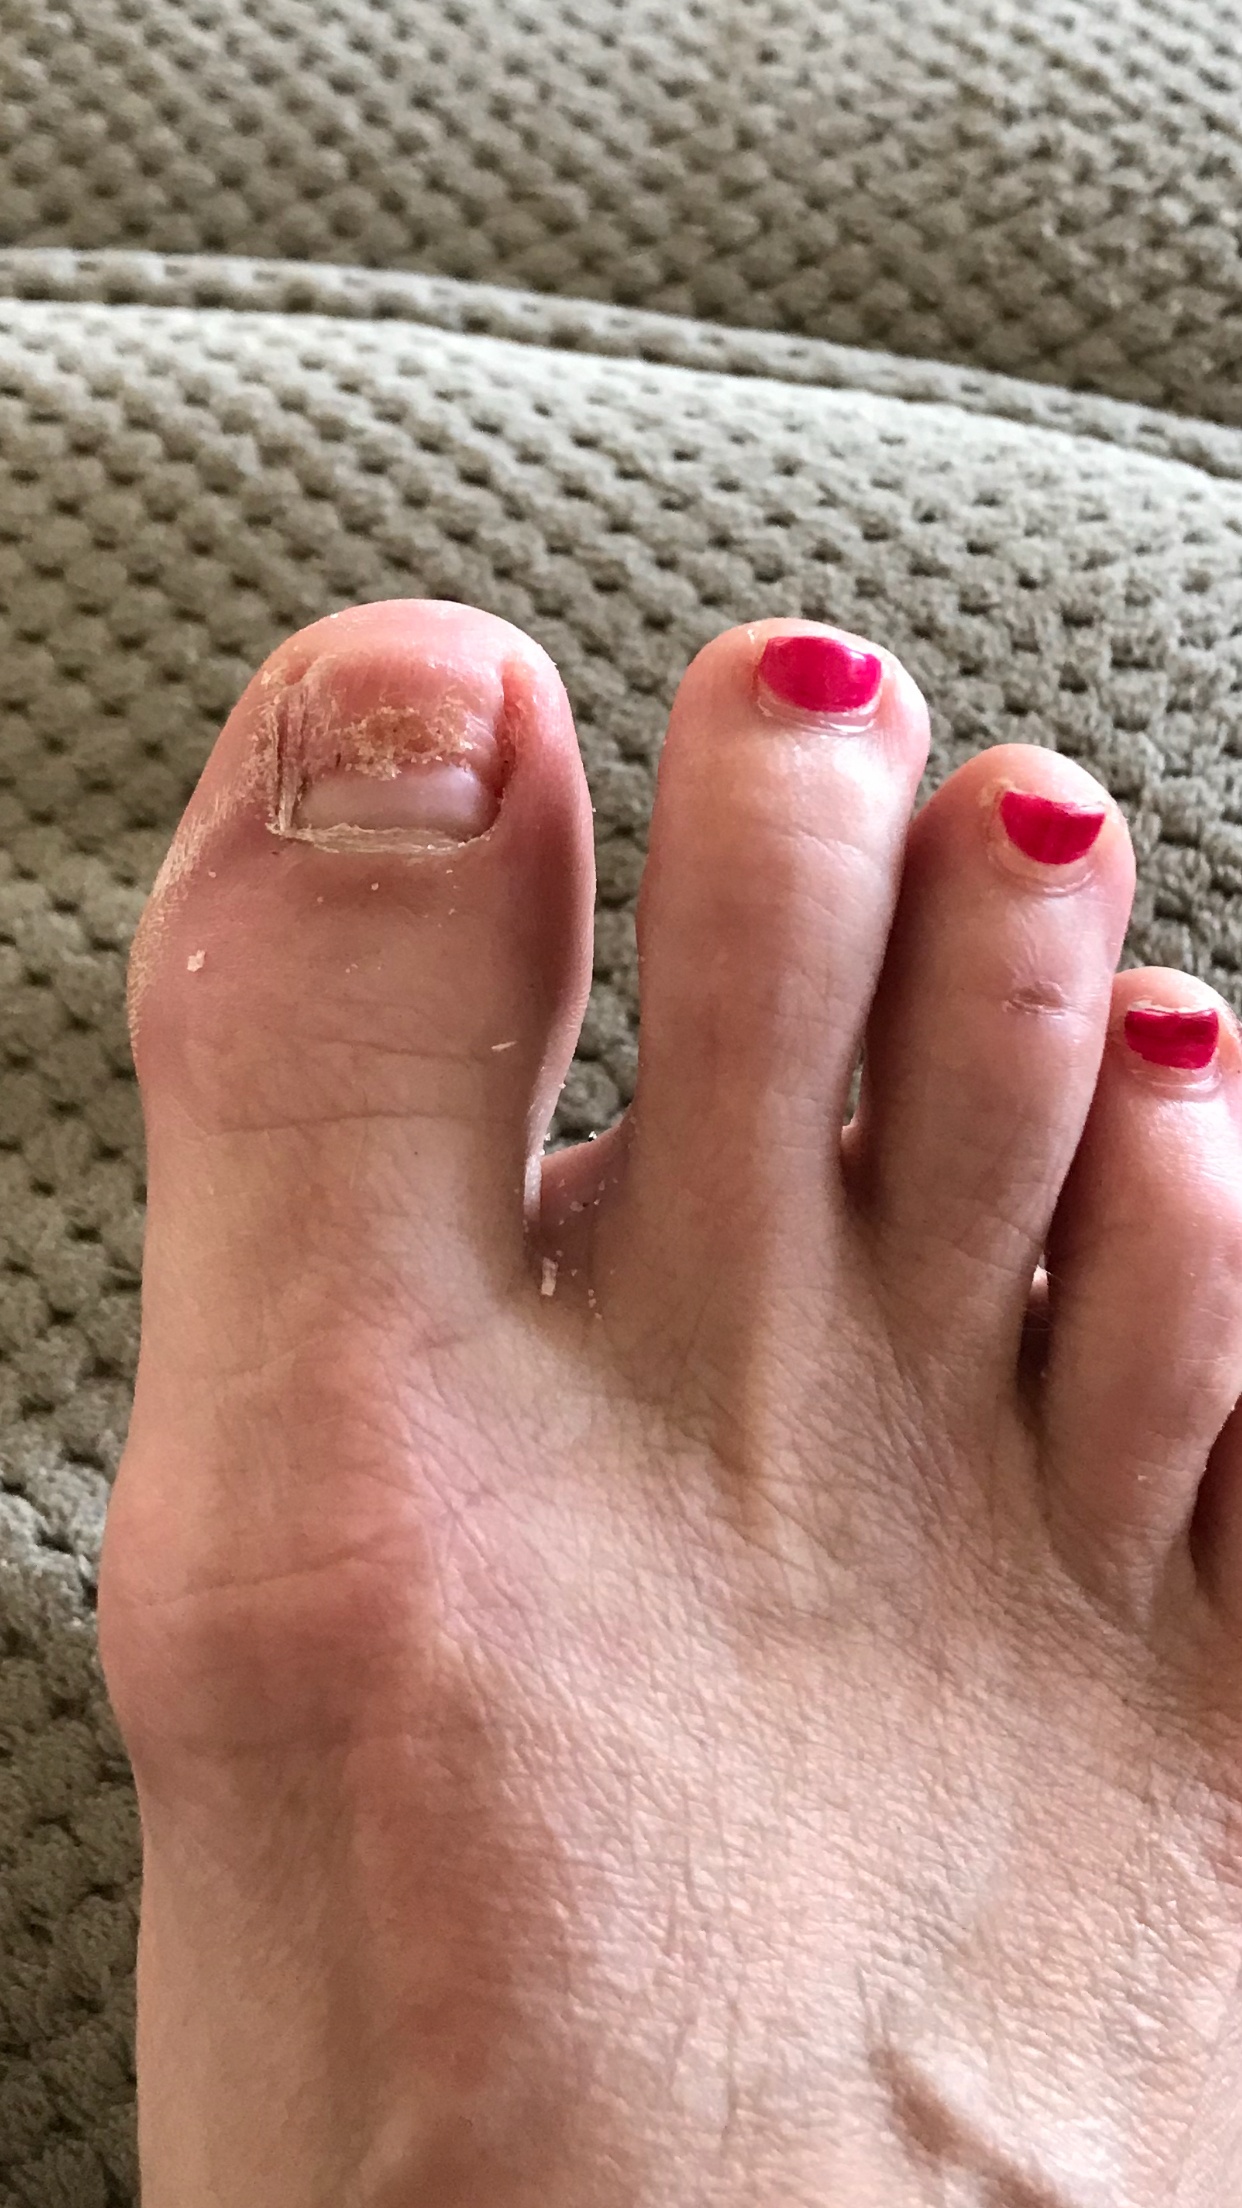 An Important Lesson from My Big Toe